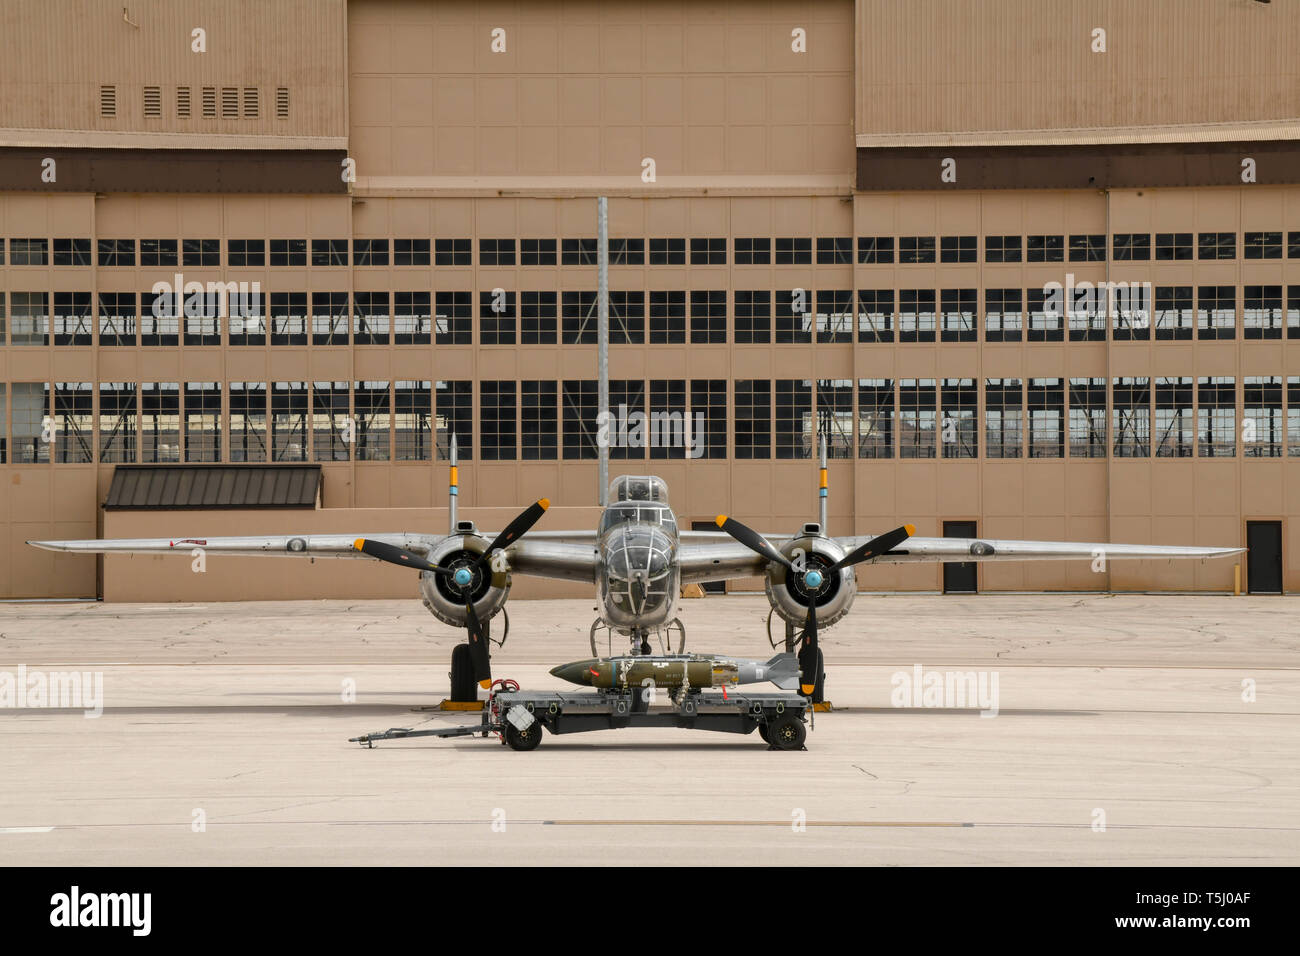 A B-25 Mitchell is displayed by the Pride Hangar at Ellsworth Air Force Base, S.D., April 18, 2019, as part of an event commemorating the 77th anniversary of the Doolittle Raid.  The B-25 took part in a U.S. retaliatory mission against Japan April 19, 1942, following the attack on Pearl Harbor, Honolulu, in 1941. (U.S. Air Force photo by Airman 1st Class Christina M. Bennett) Stock Photo